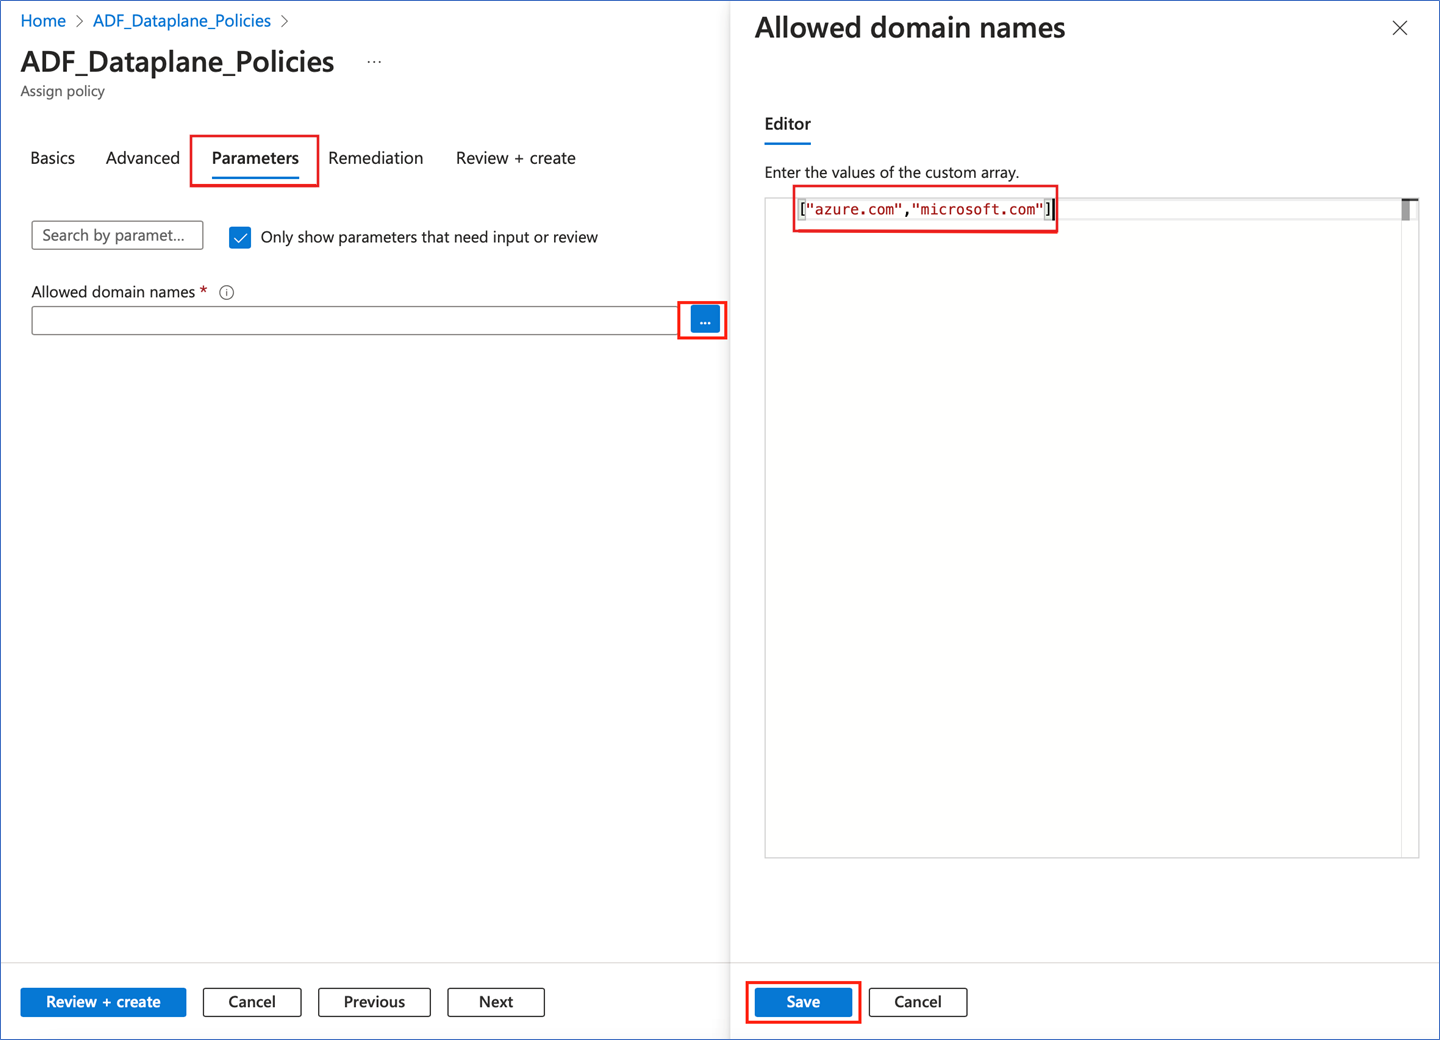 Screenshot showing the ADF_Dataplane_Policies policy assignment dialog with the Parameters tab selected and a domain list provided.